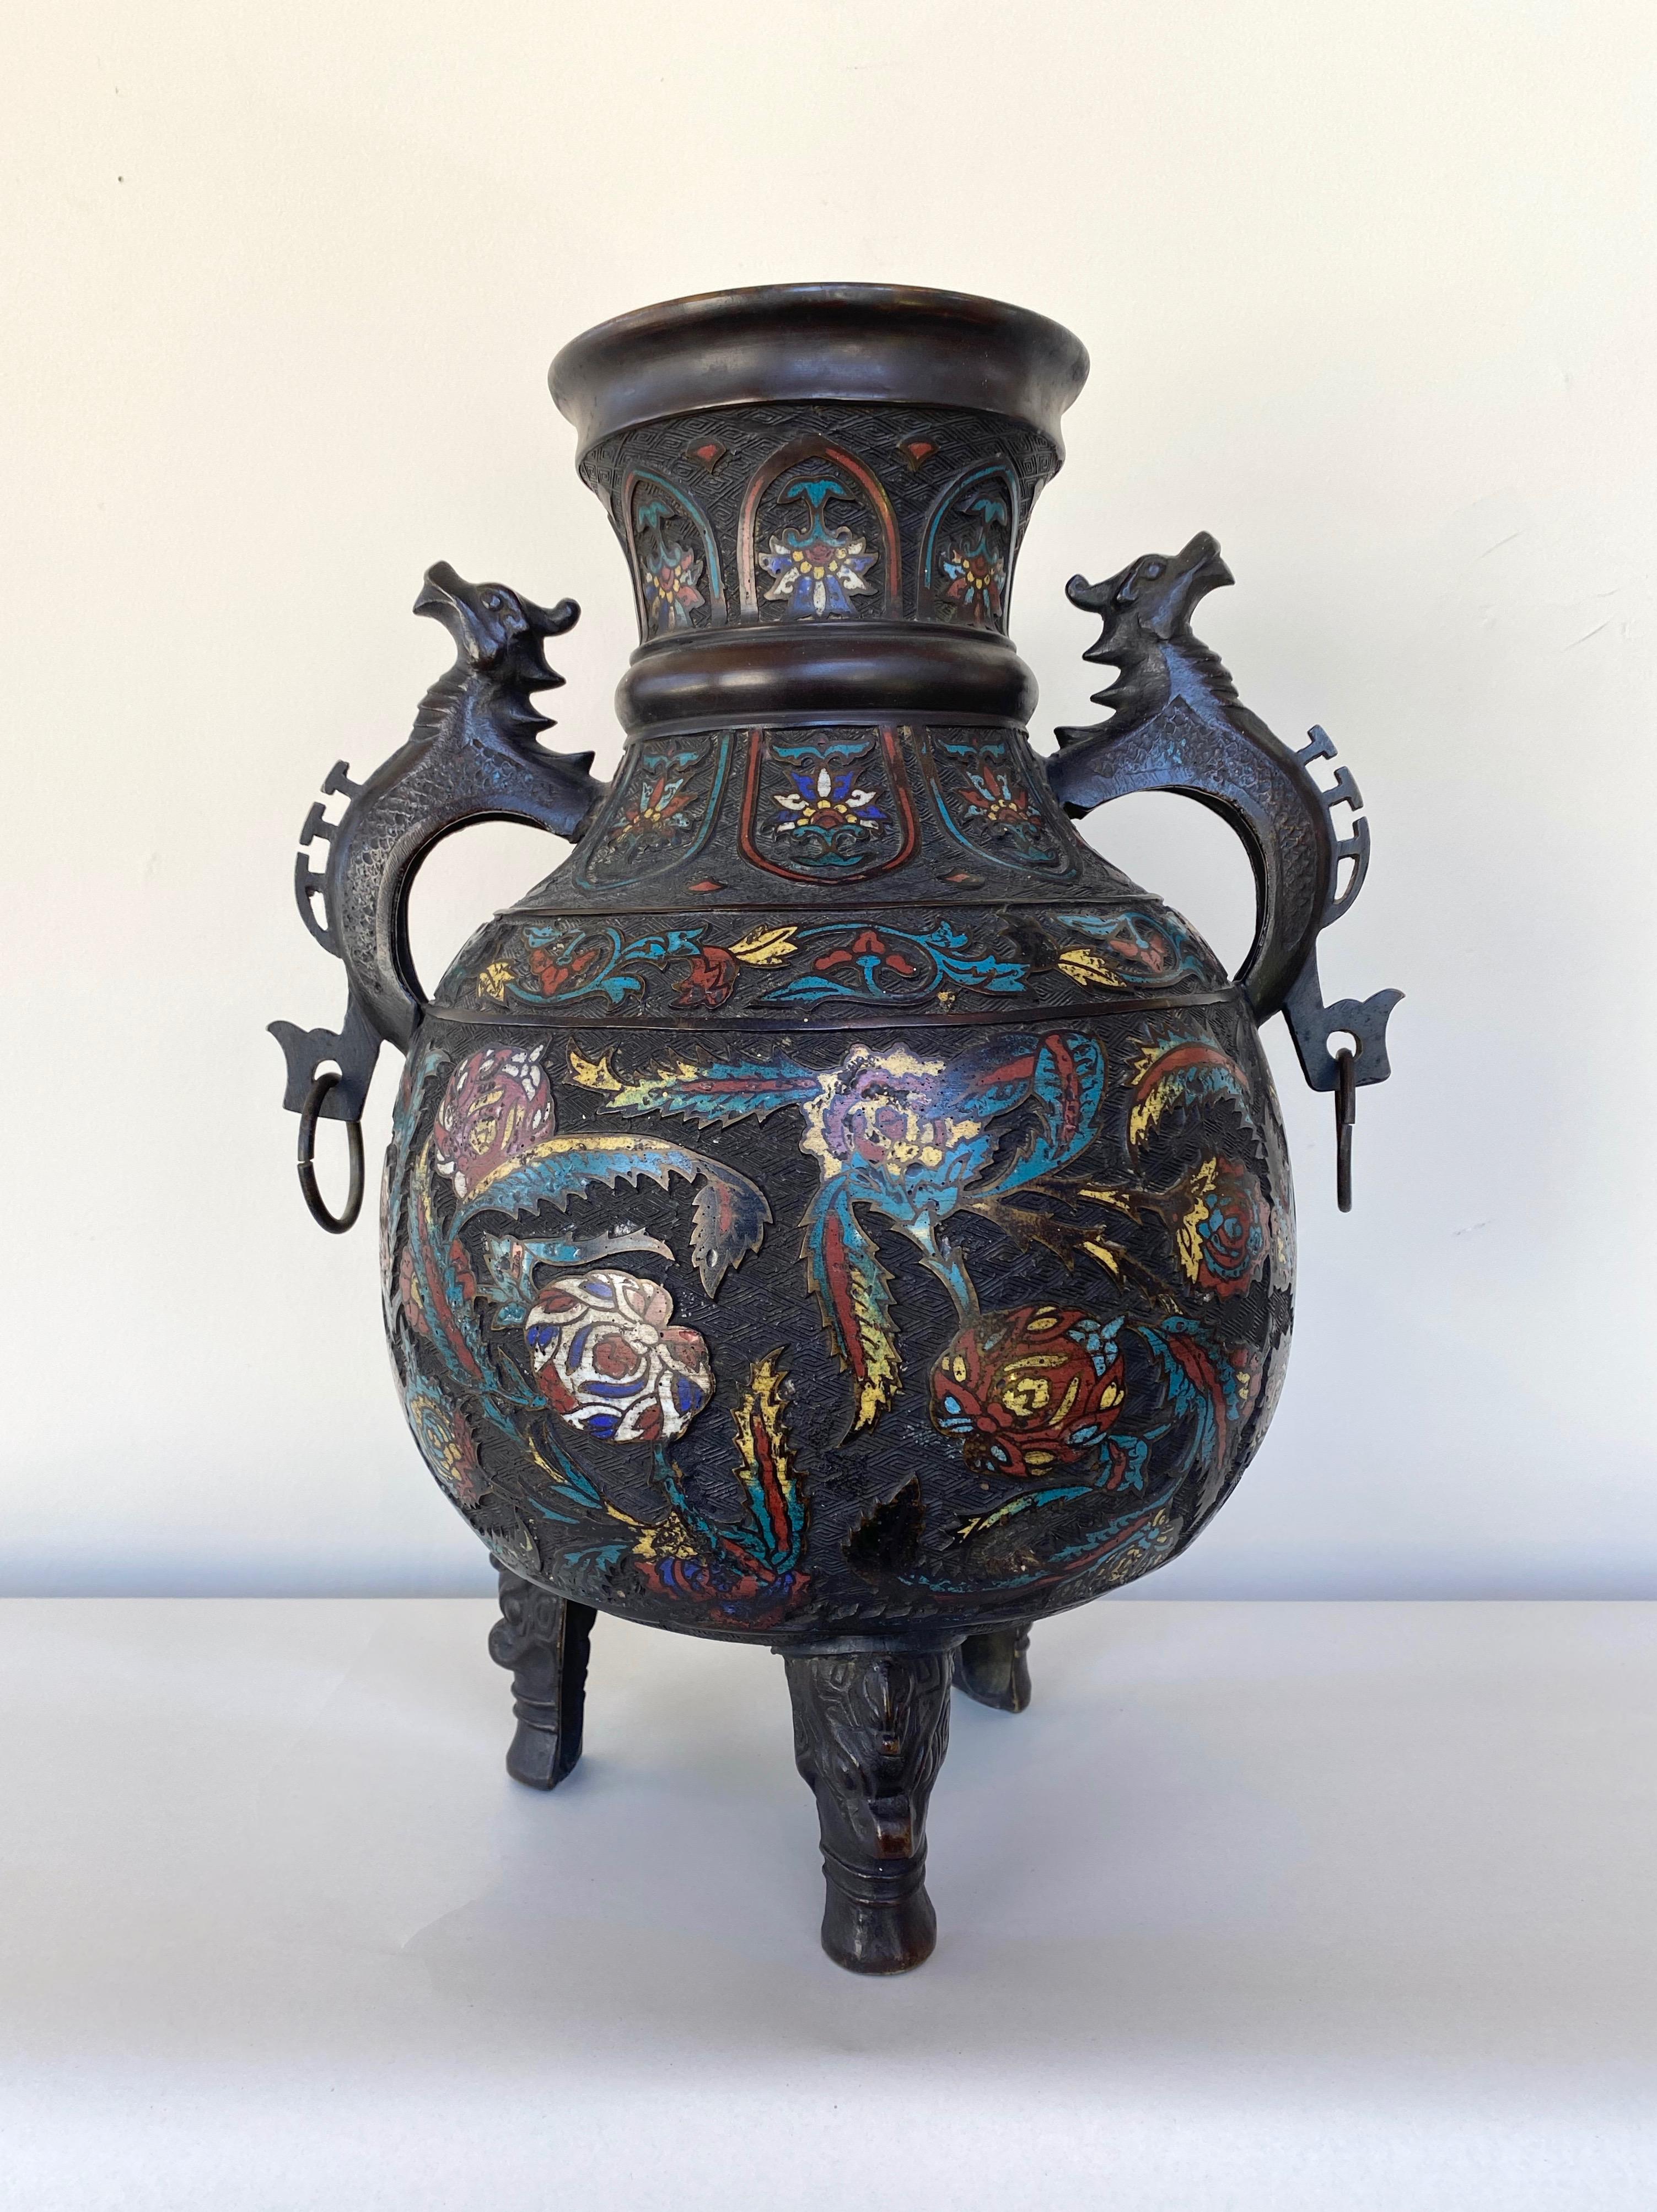 A large 19th century Chinese Qing dynasty solid bronze cloisonné urn or vessel with dragon handles and feet.

Ample form with dark patina features colorful cloisonné floral and leaf decorations in relief against an exactingly executed geometric